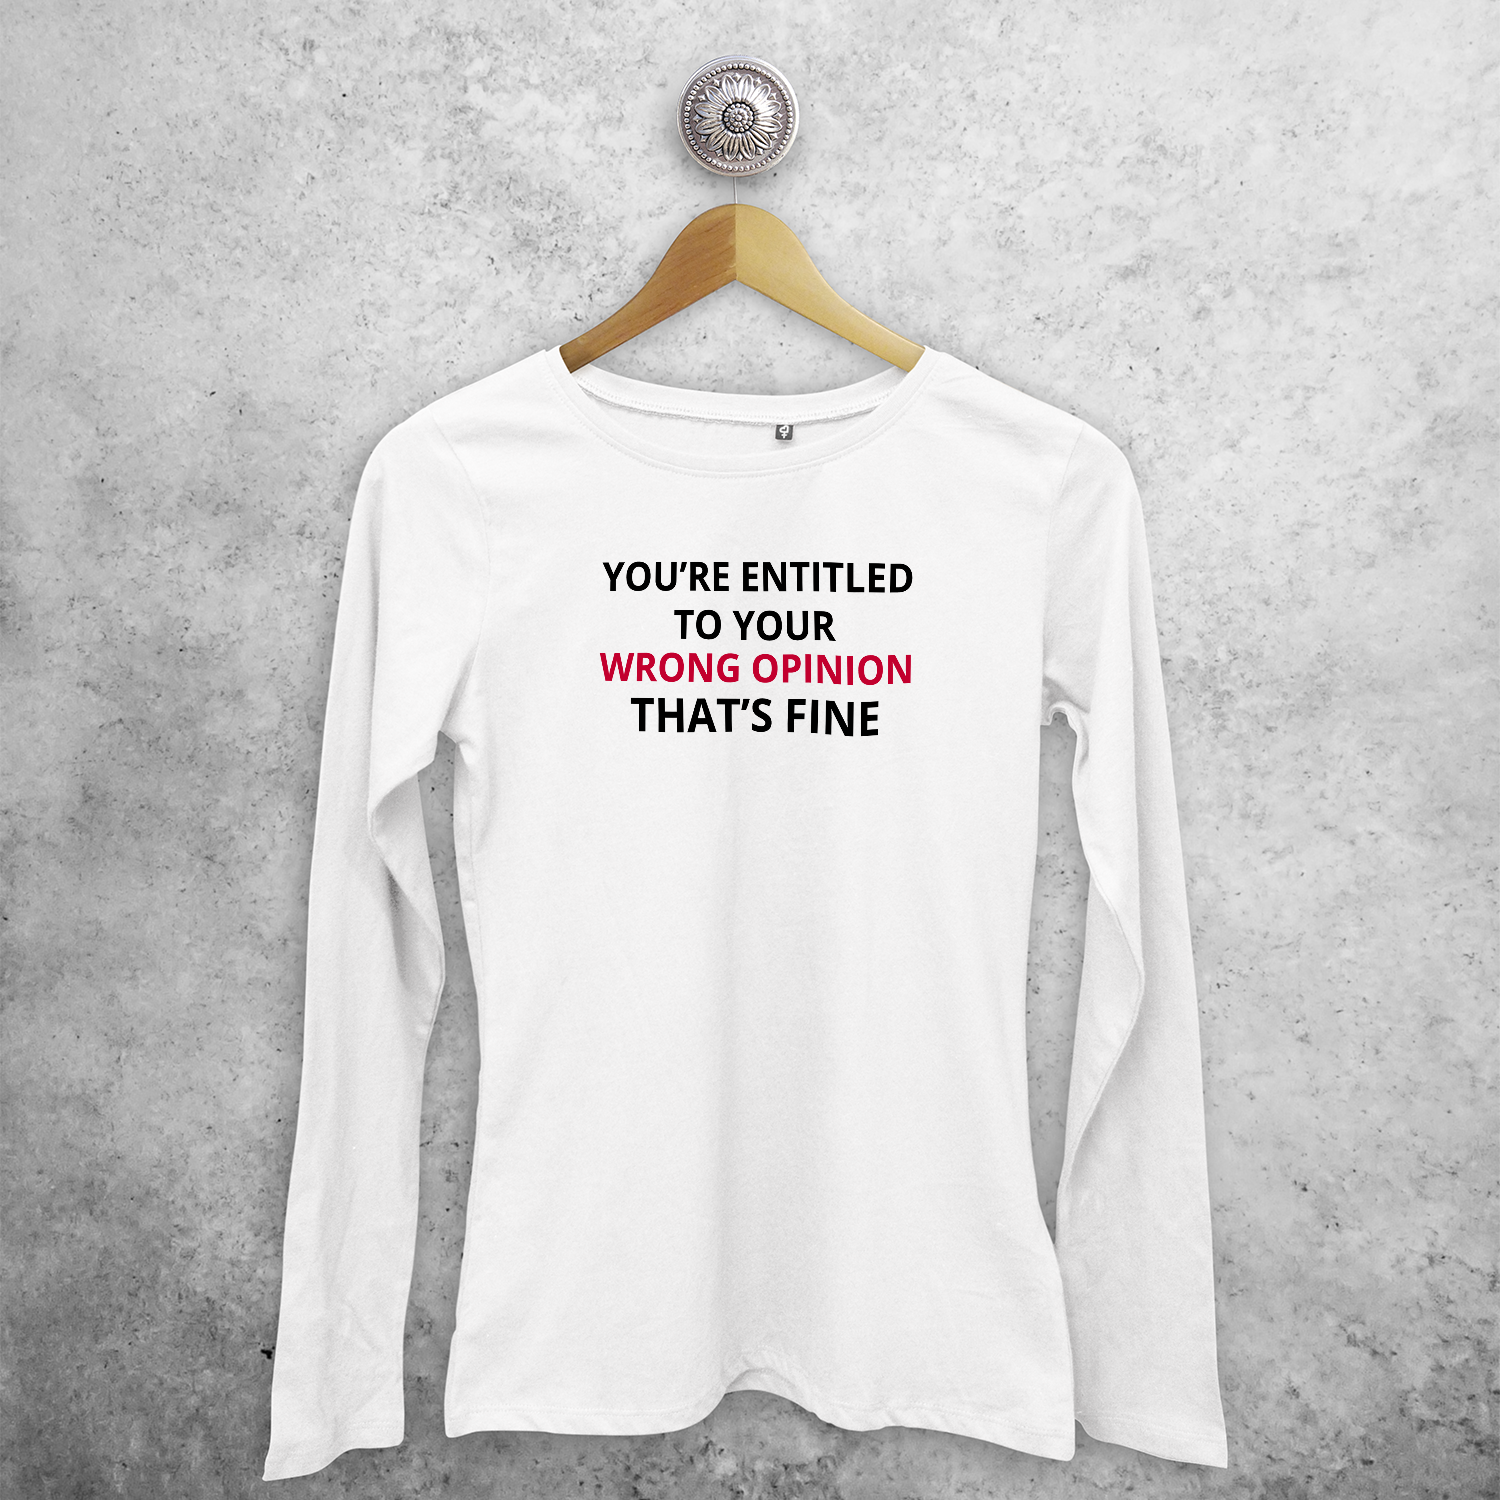 You're entitled to your wrong opinion - That's fine' volwassene shirt met lange mouwen